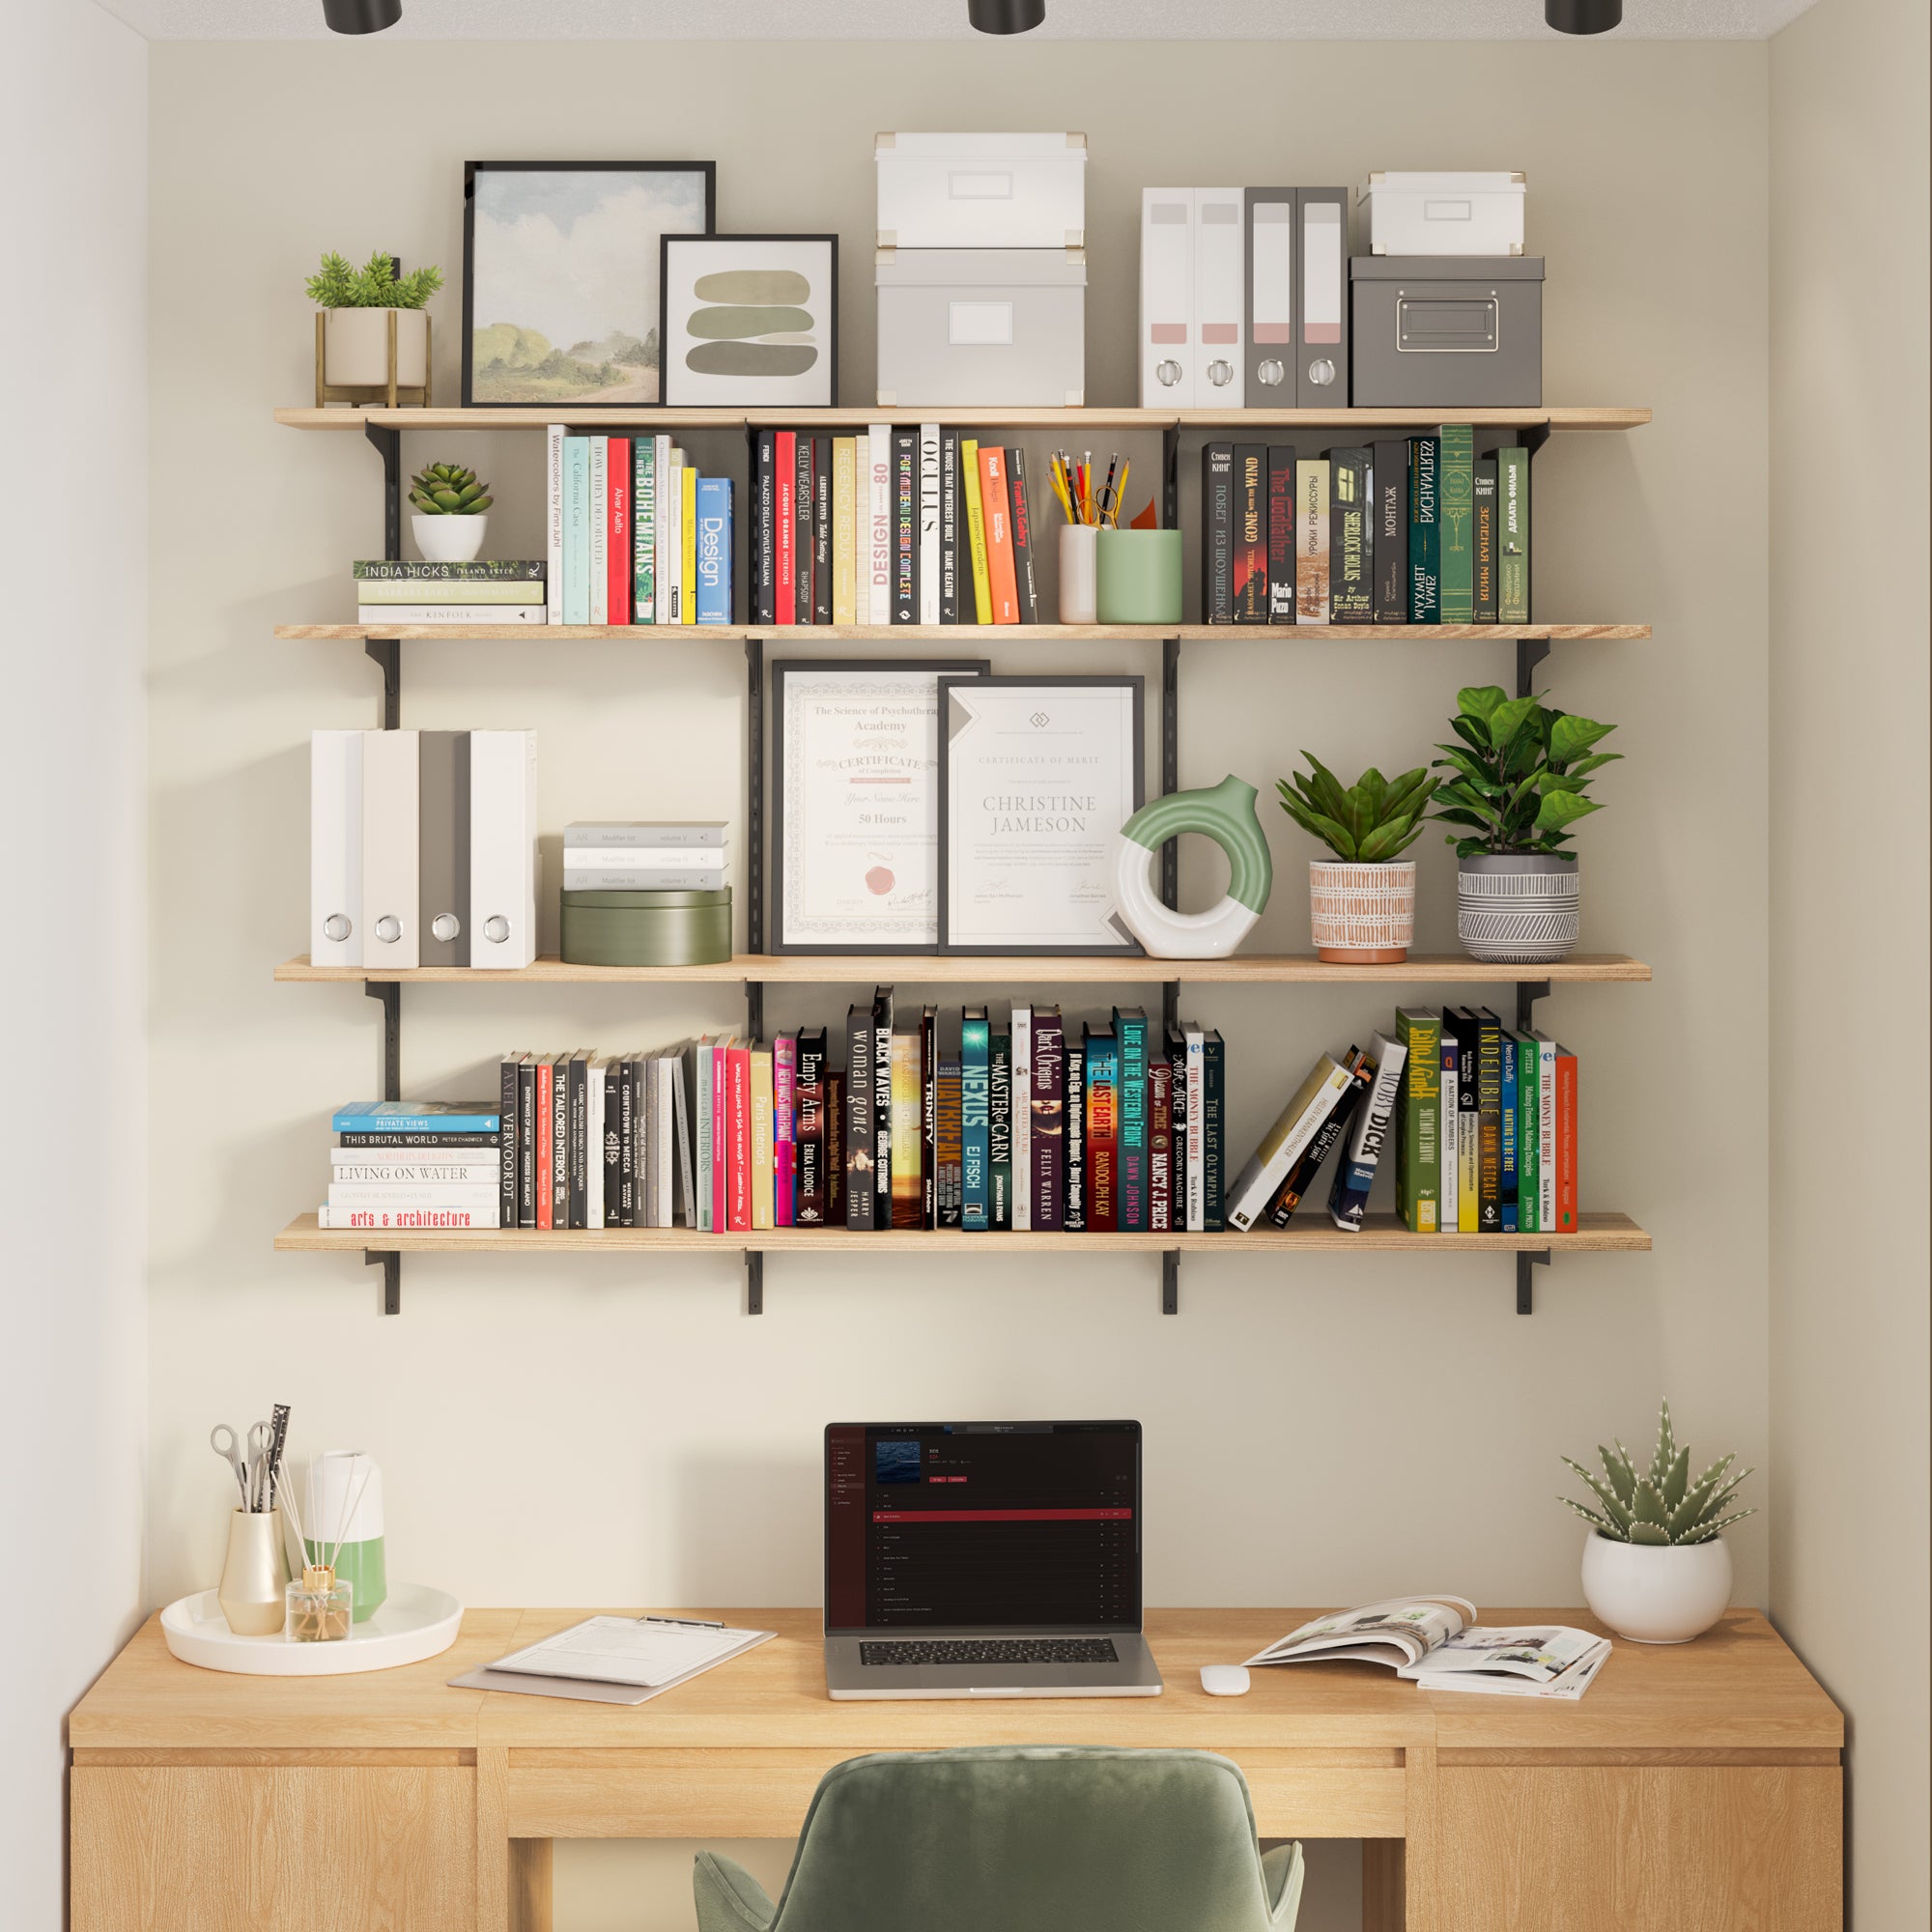 An organized home office shelf with books, documents, and decor, creating an efficient workspace that is also visually appealing.